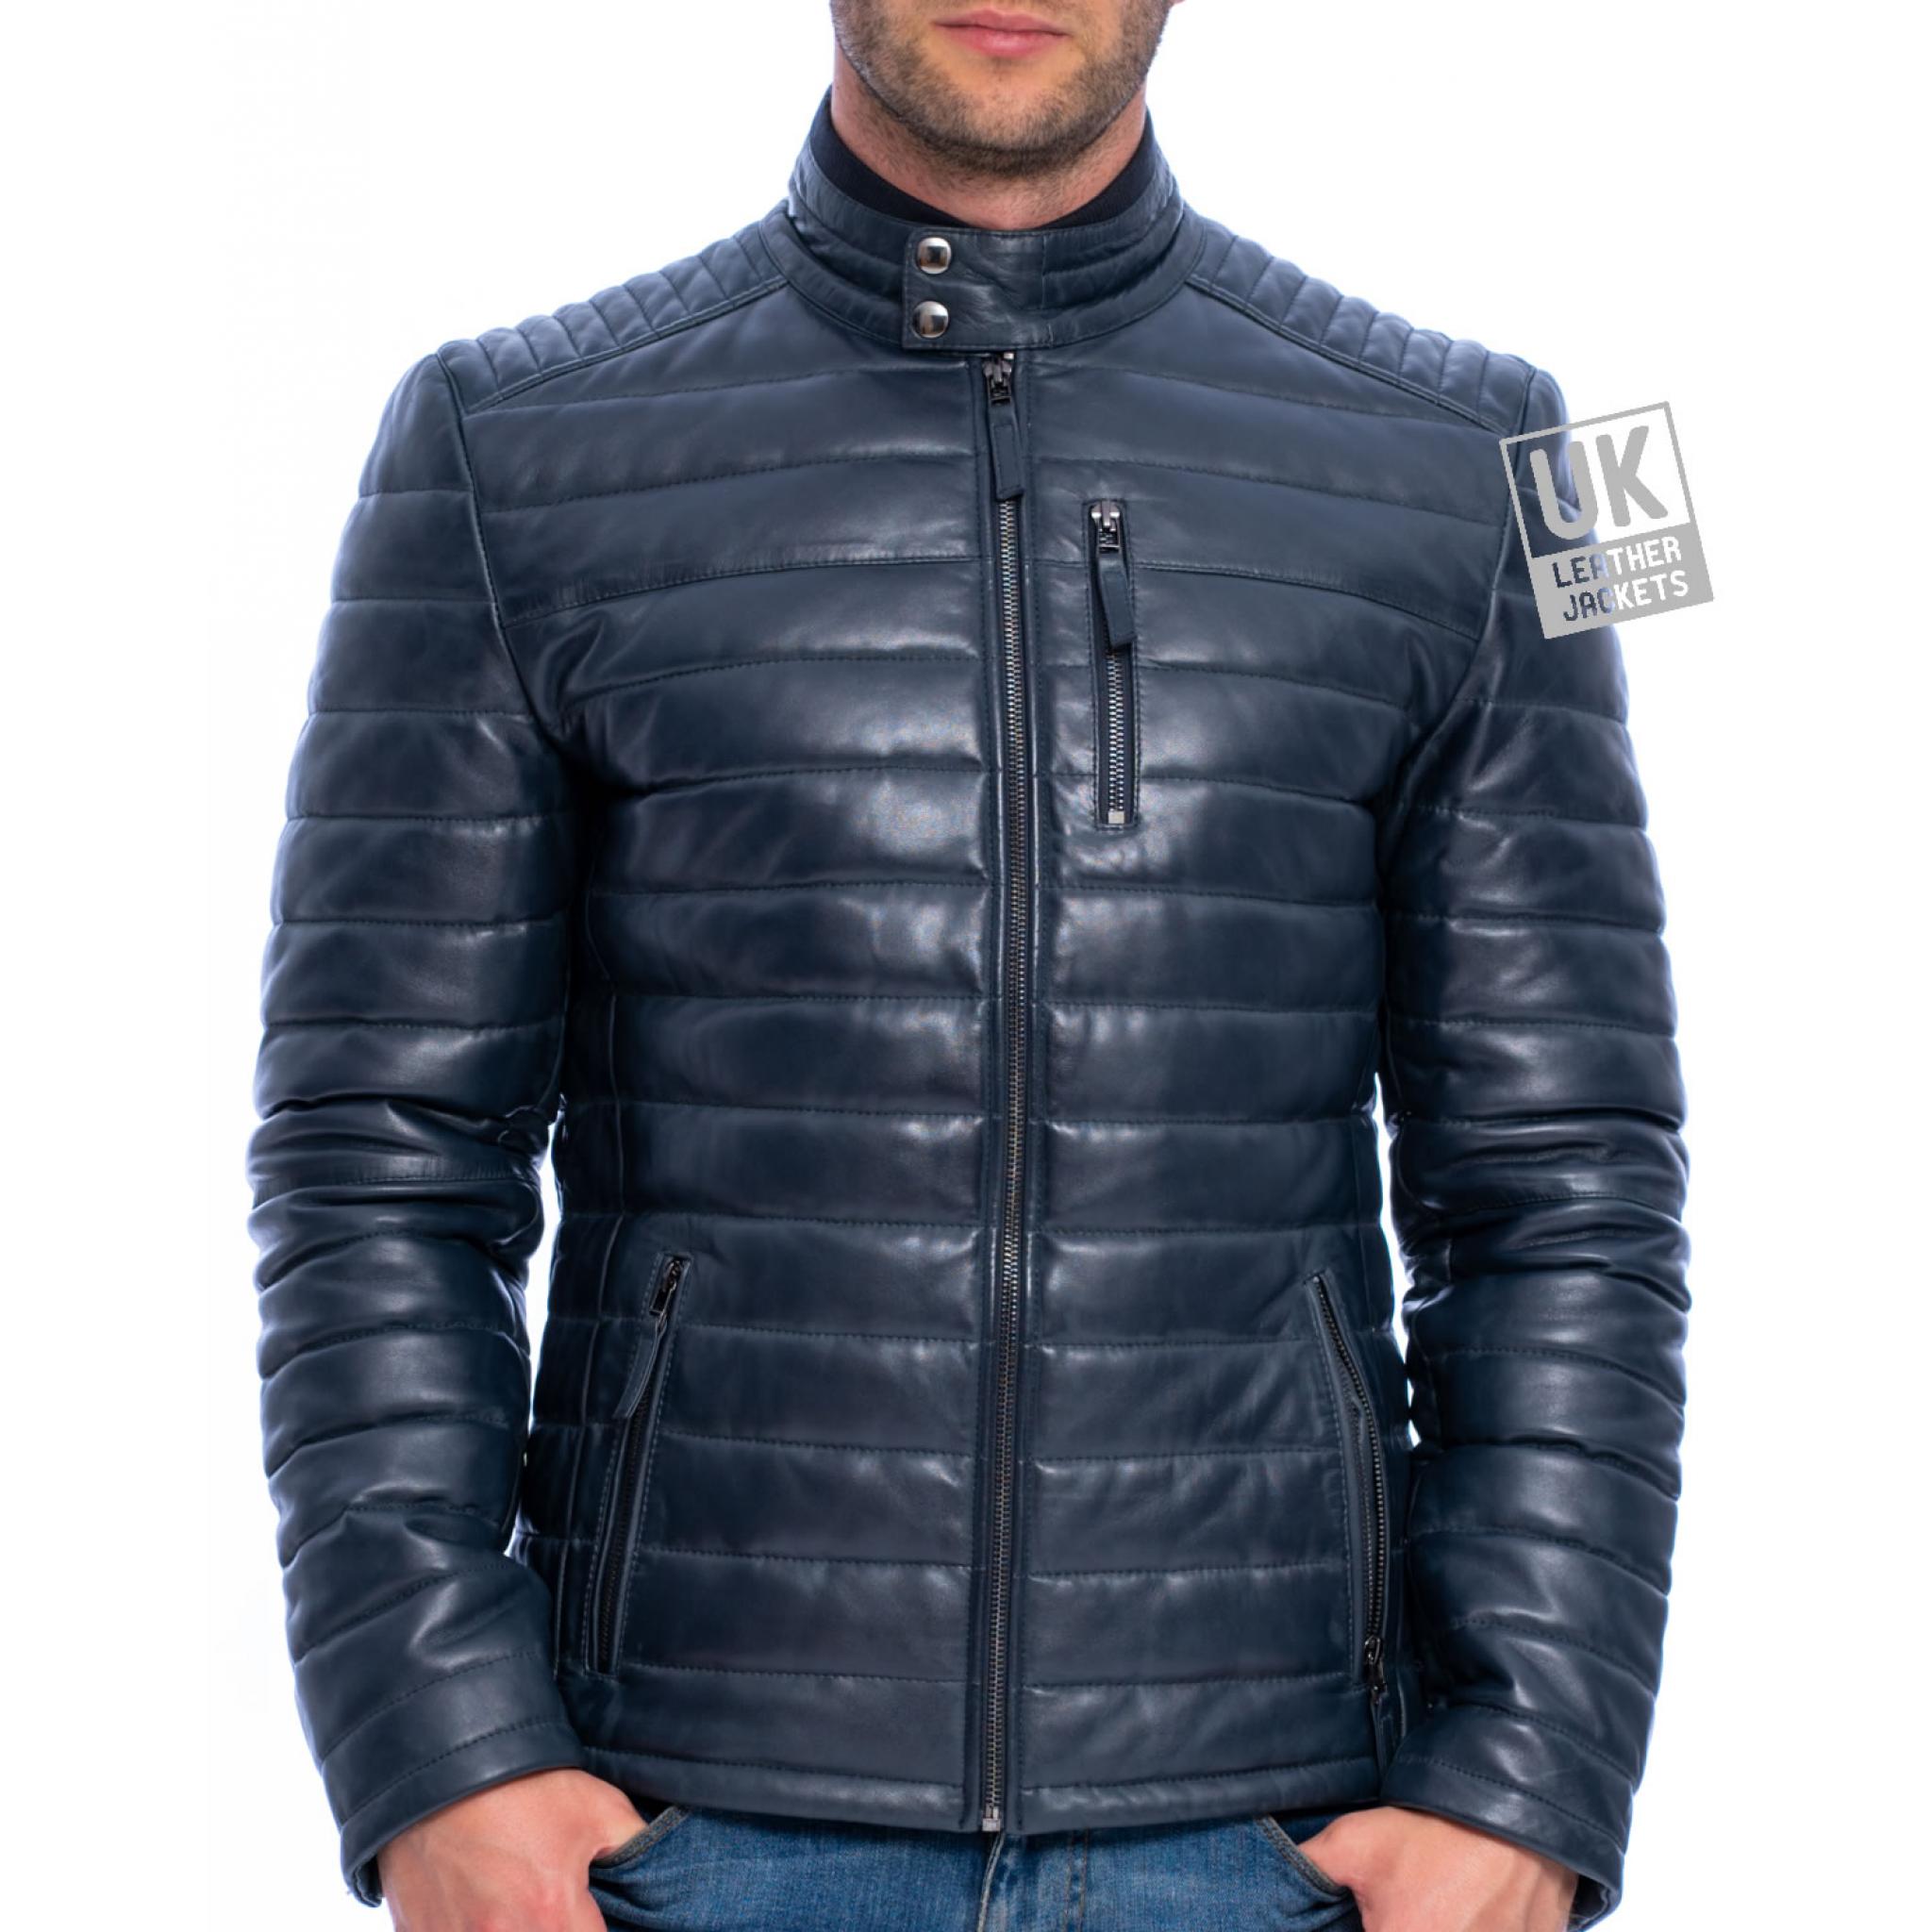 Mens Navy Blue Leather Jacket - Ultra Light Quilted | UK Leather Jackets